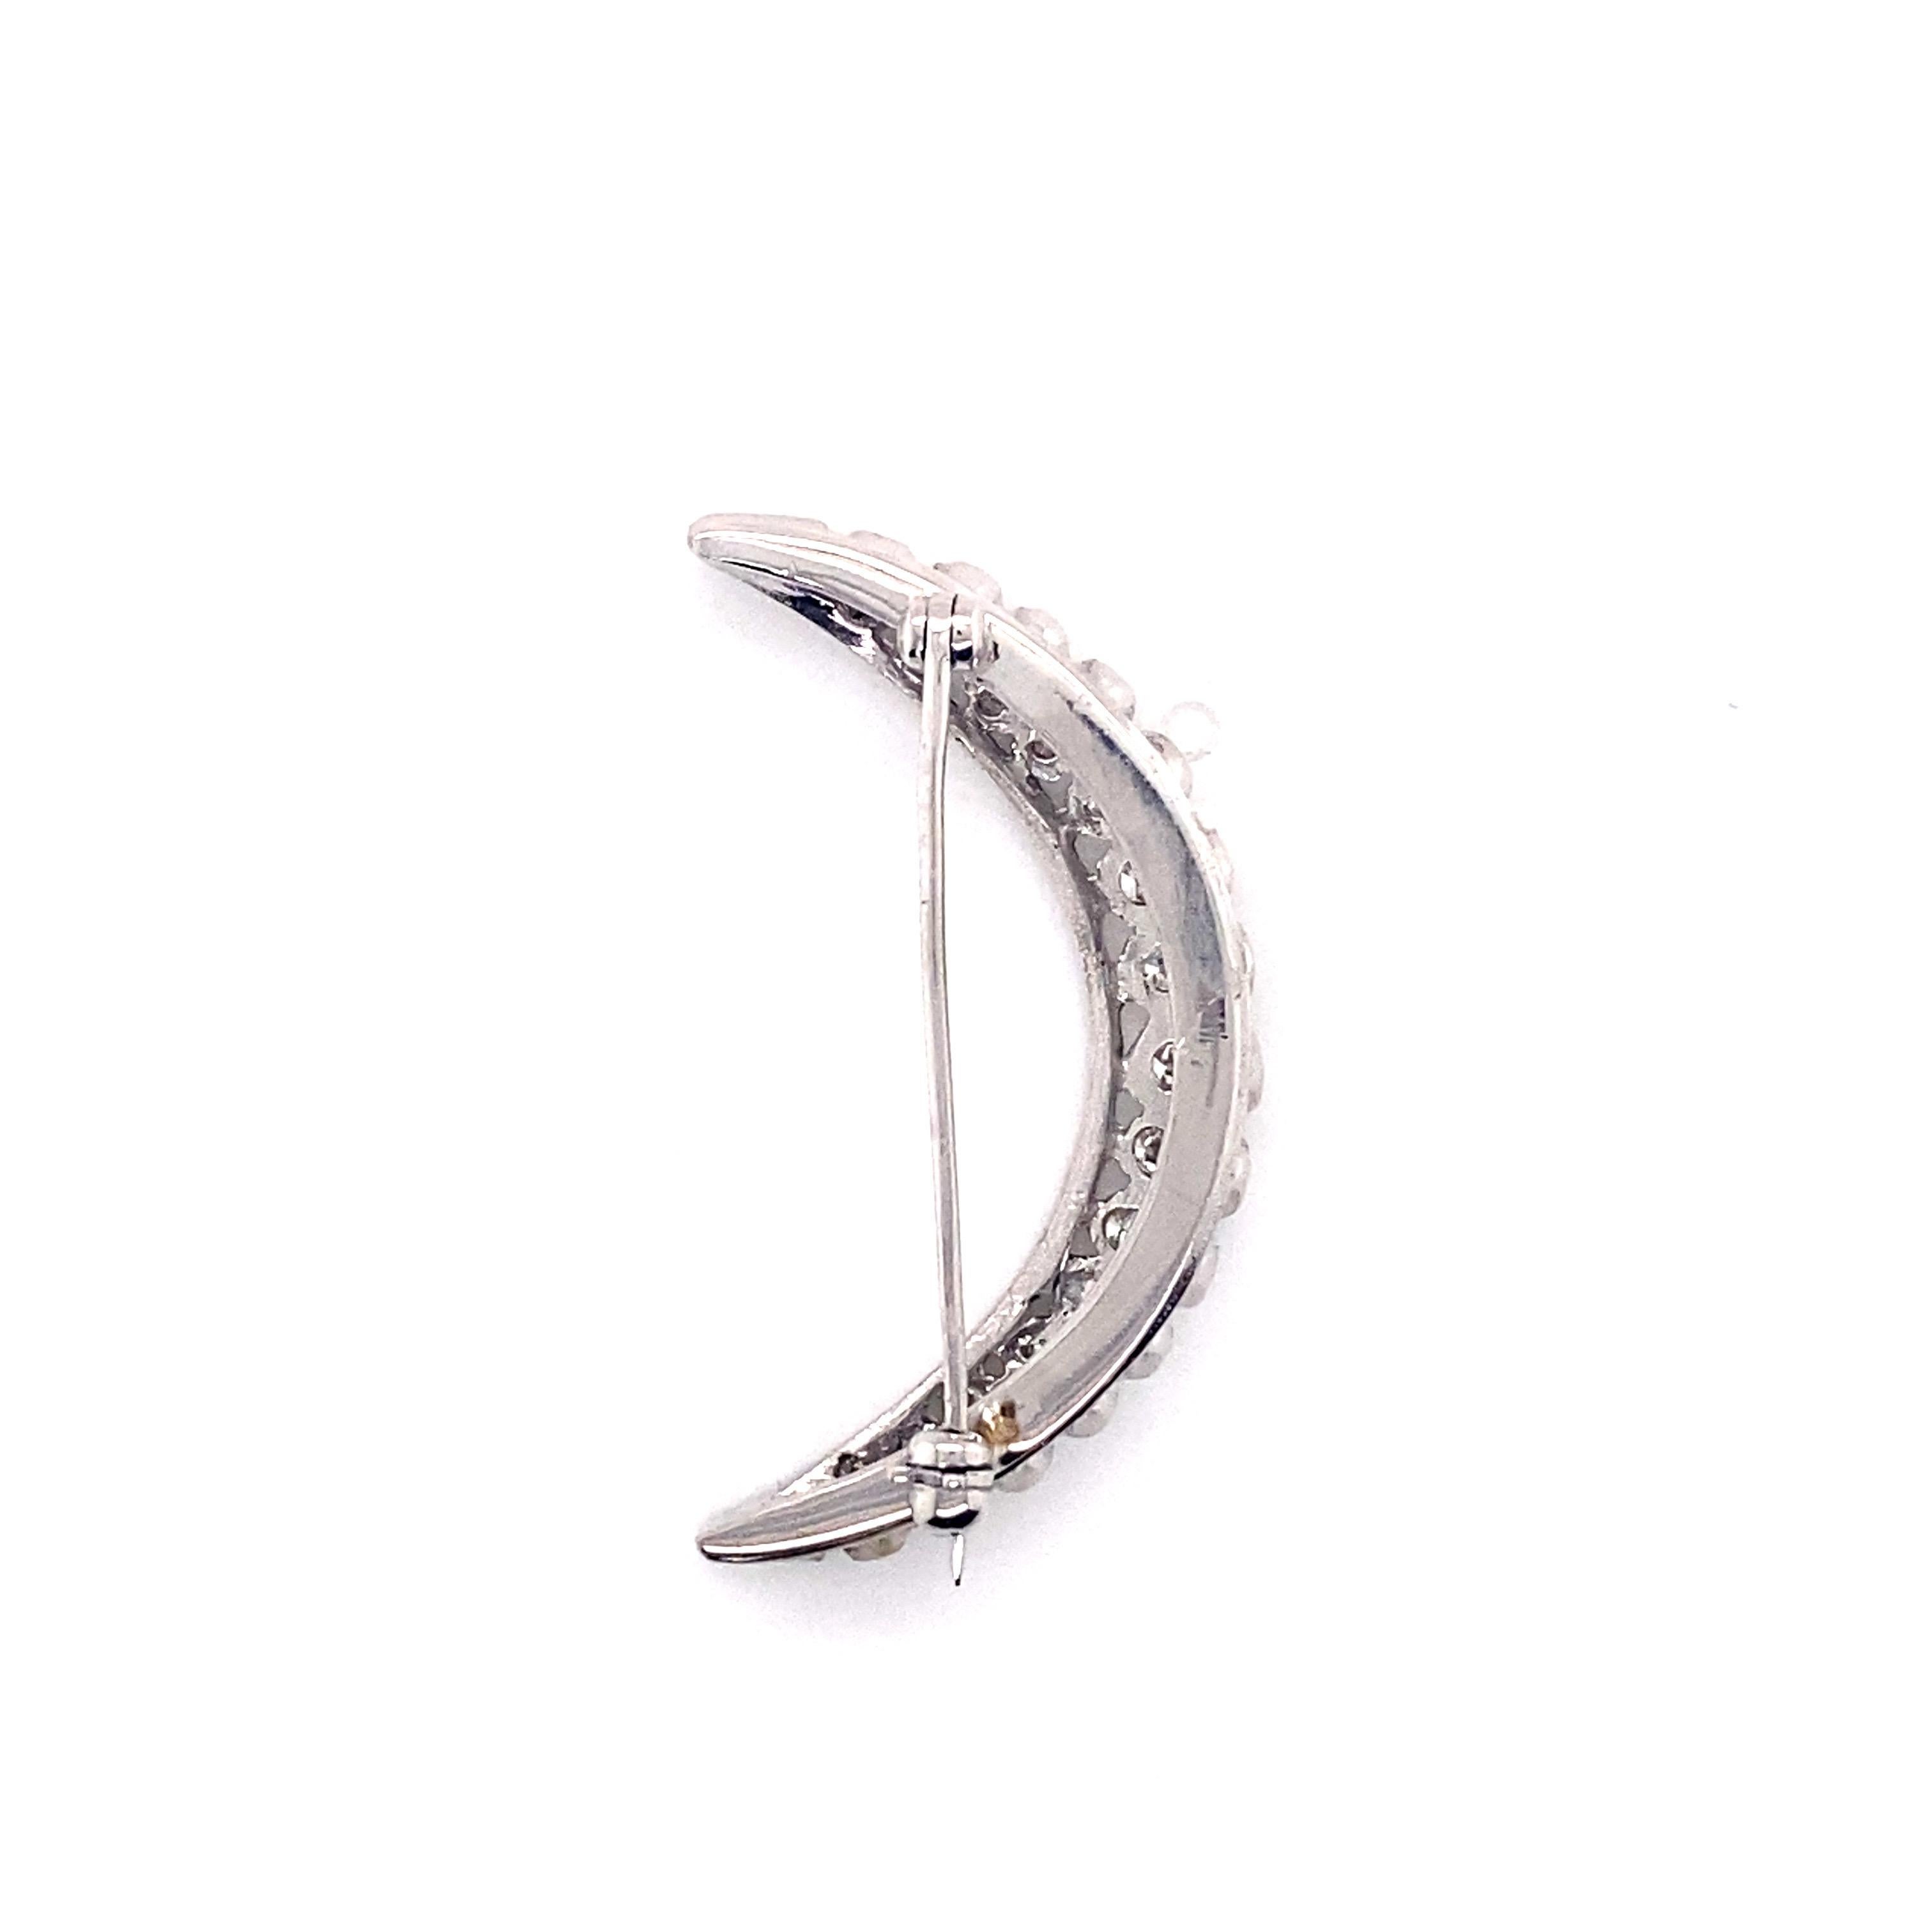 A celestial delight, this vintage crescent moon pin from the 1960s exudes timeless beauty. Rendered in luxurious 14K white gold, the dimensional design features a crescent moon silhouette shimmering with 15 round brilliant diamonds. The diamonds